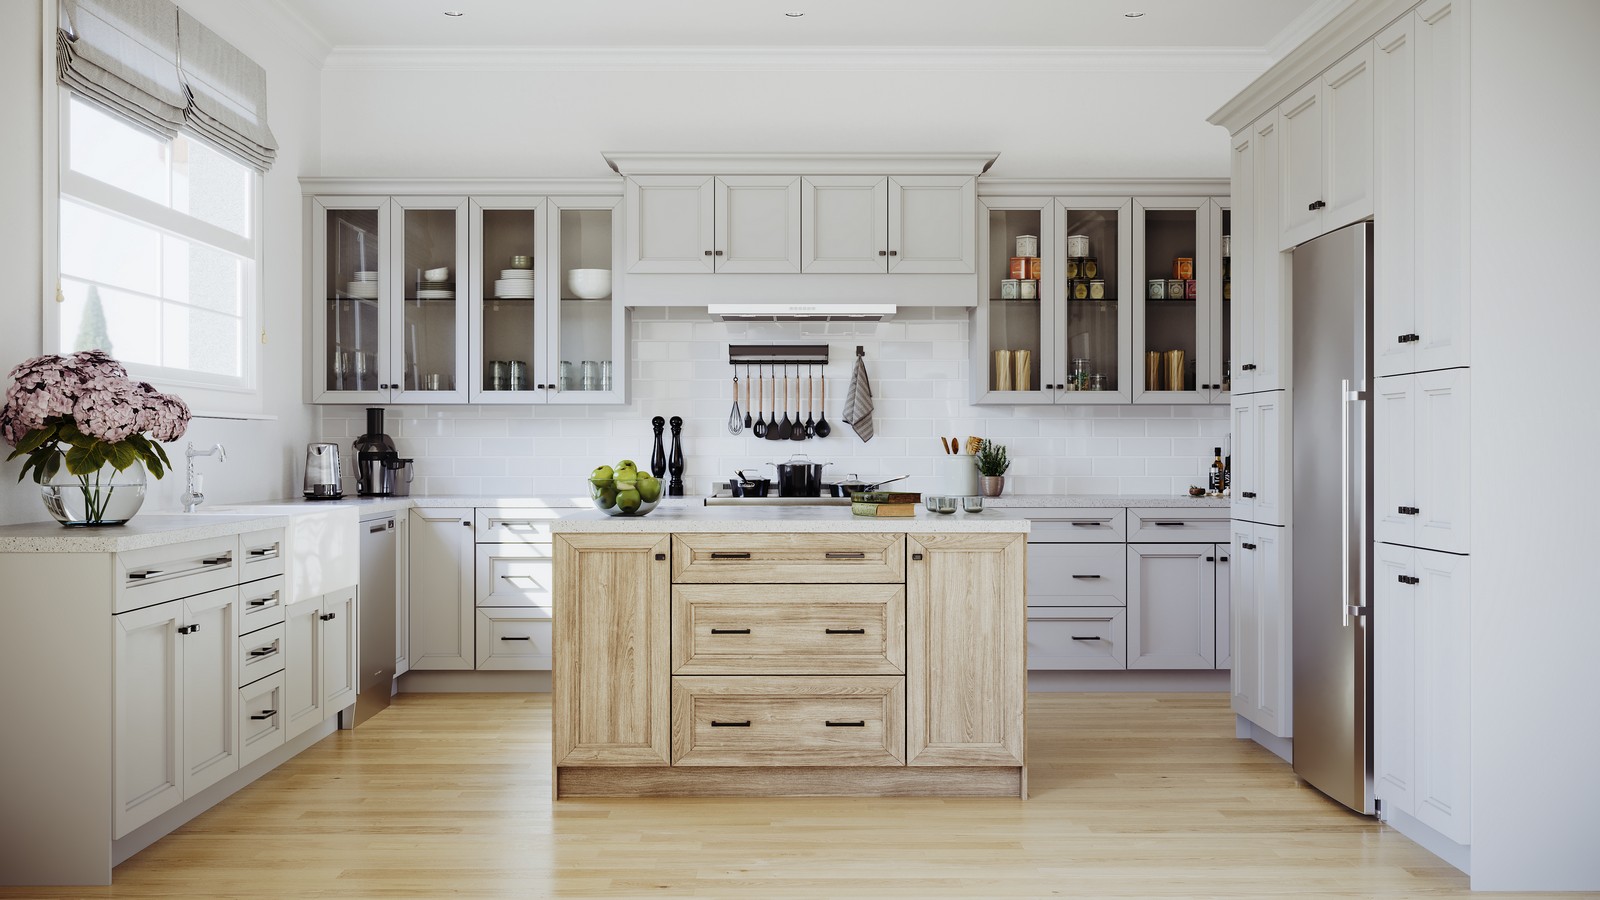 Kitchen Beauty Shots Showcasing The Cabinetry Style - , 7